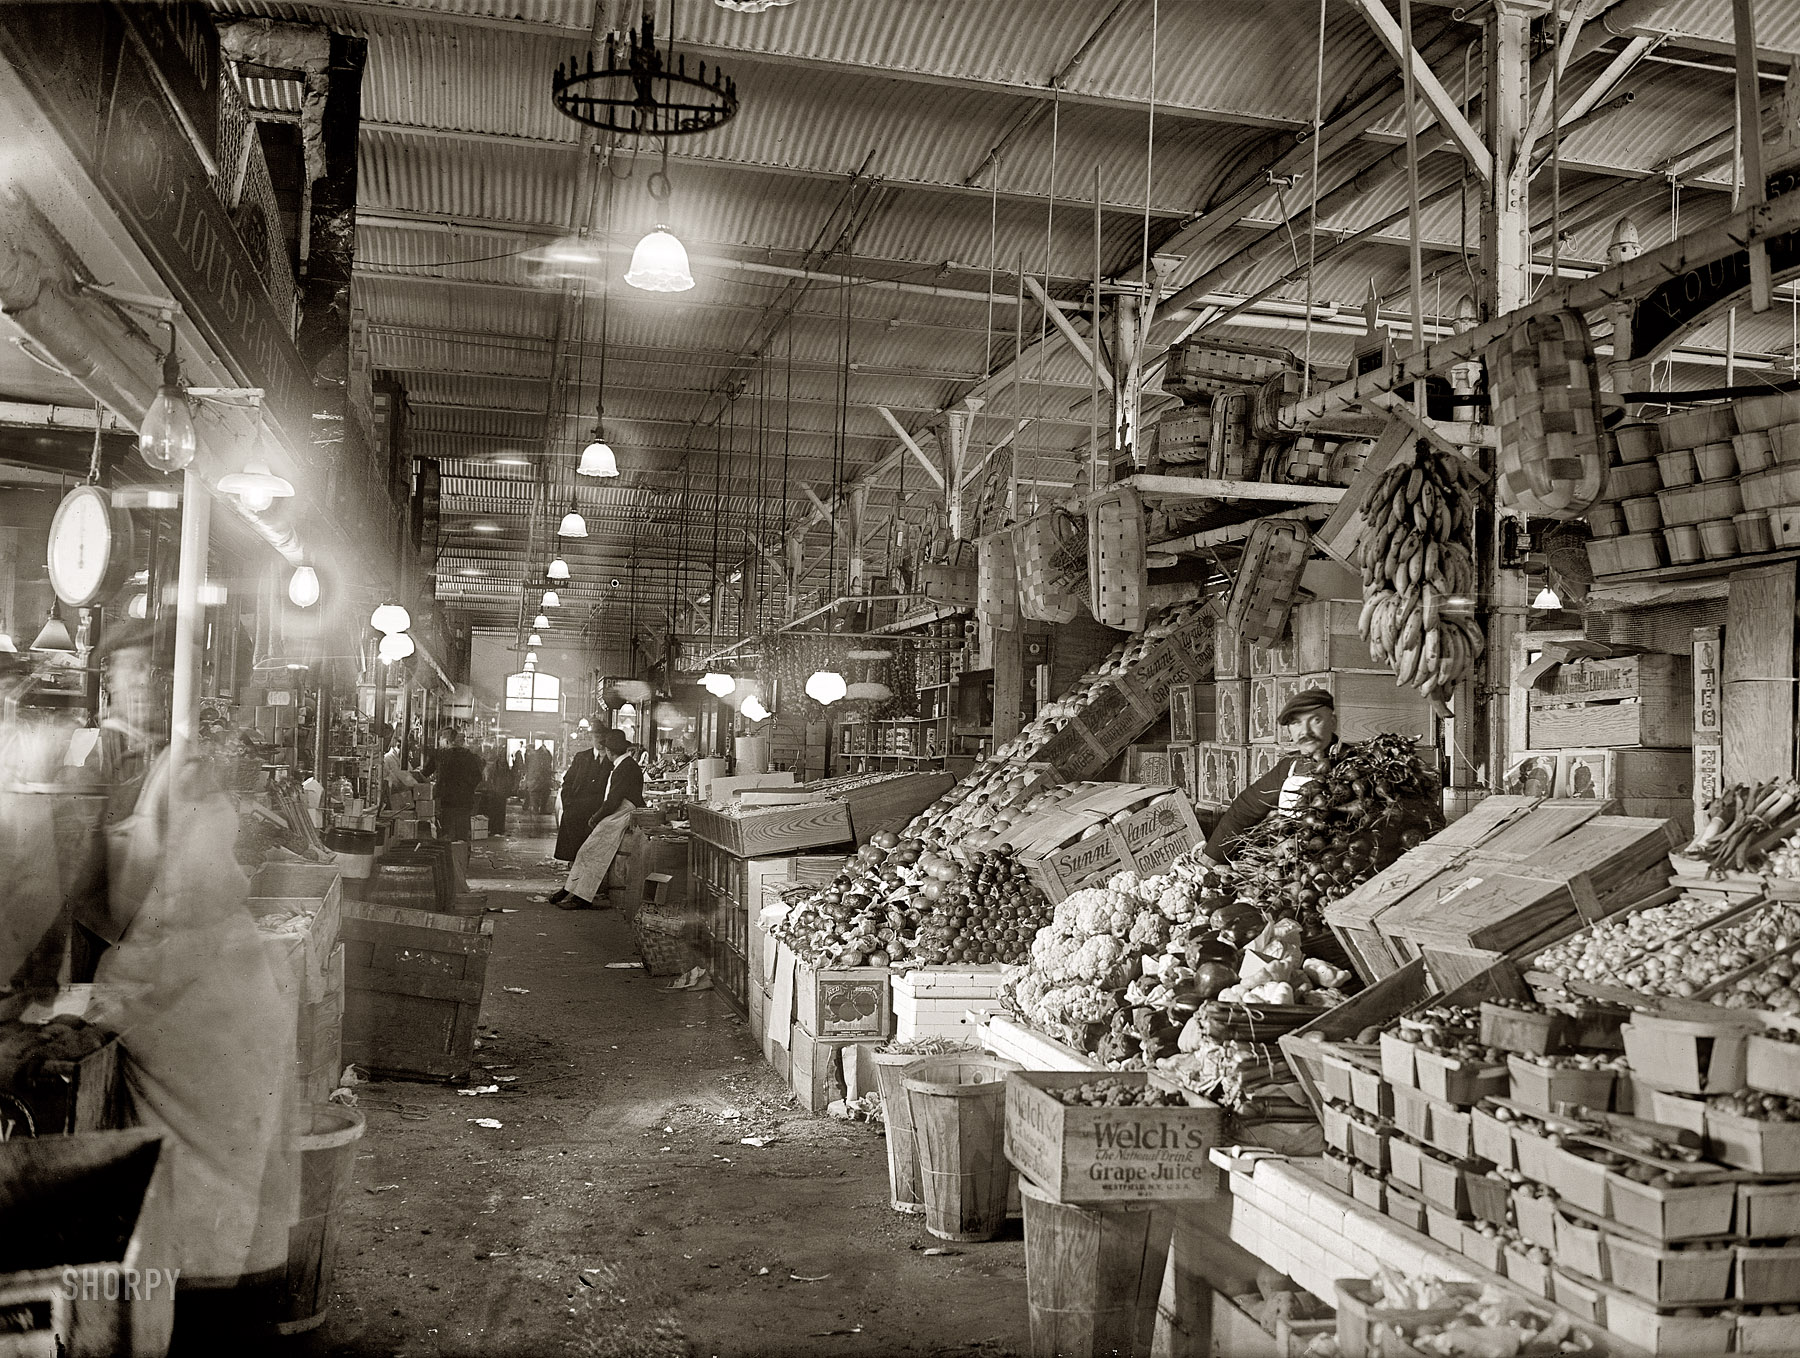 "Center Market, 1922." Produce vendors in Washington, D.C. National Photo Company Collection glass negative. View full size.